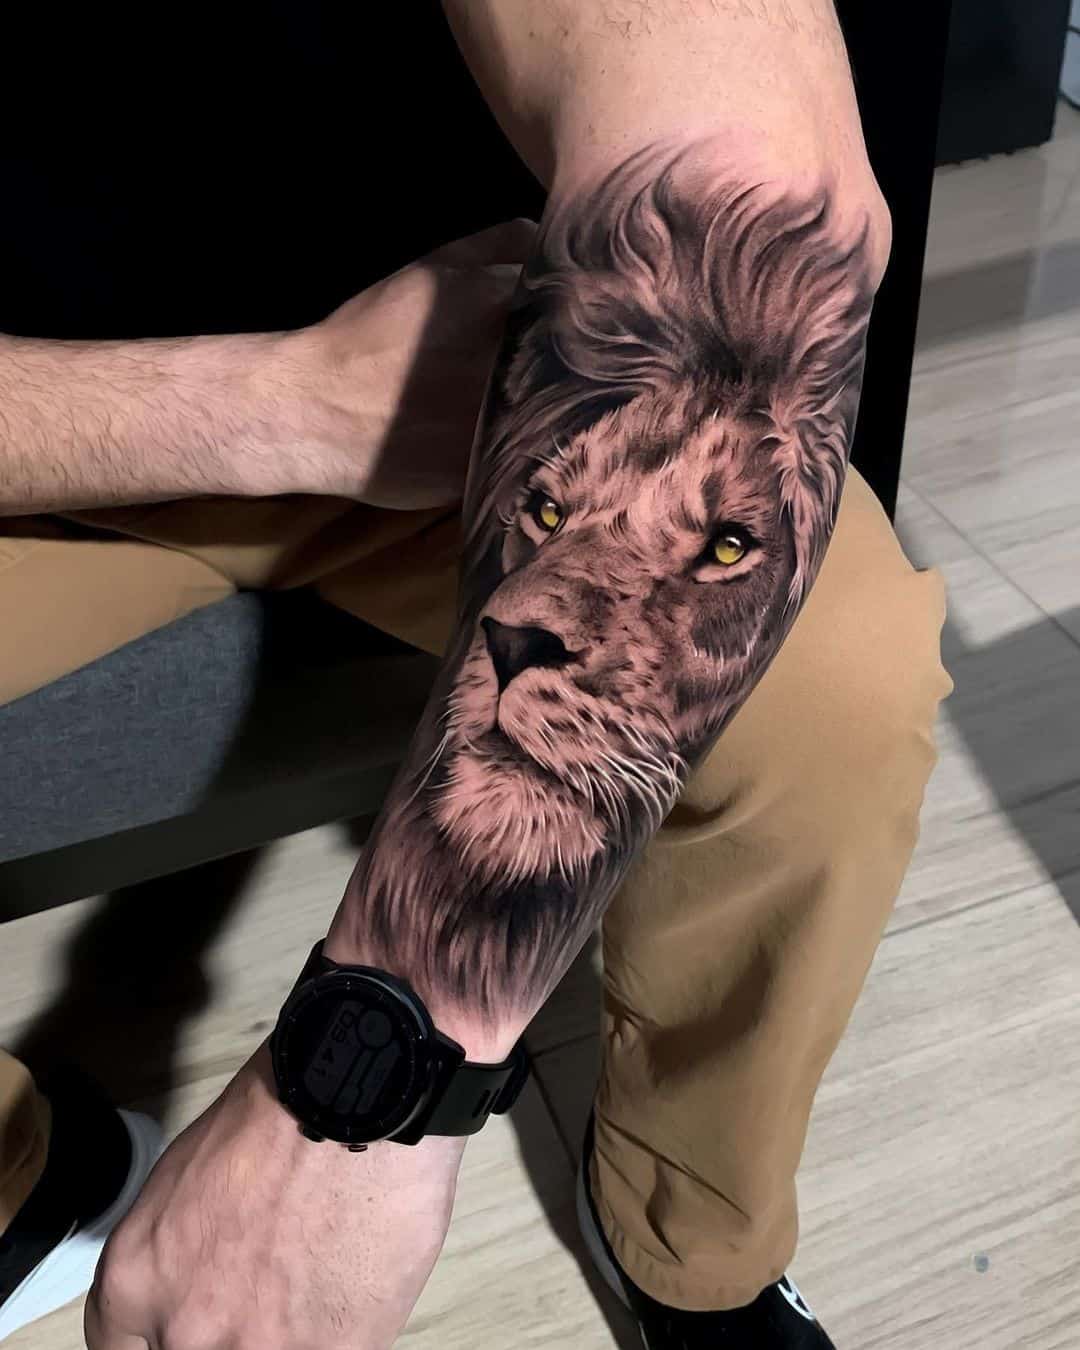 Amazing black and gray lion tattoo design by andrecarvalarttattoo